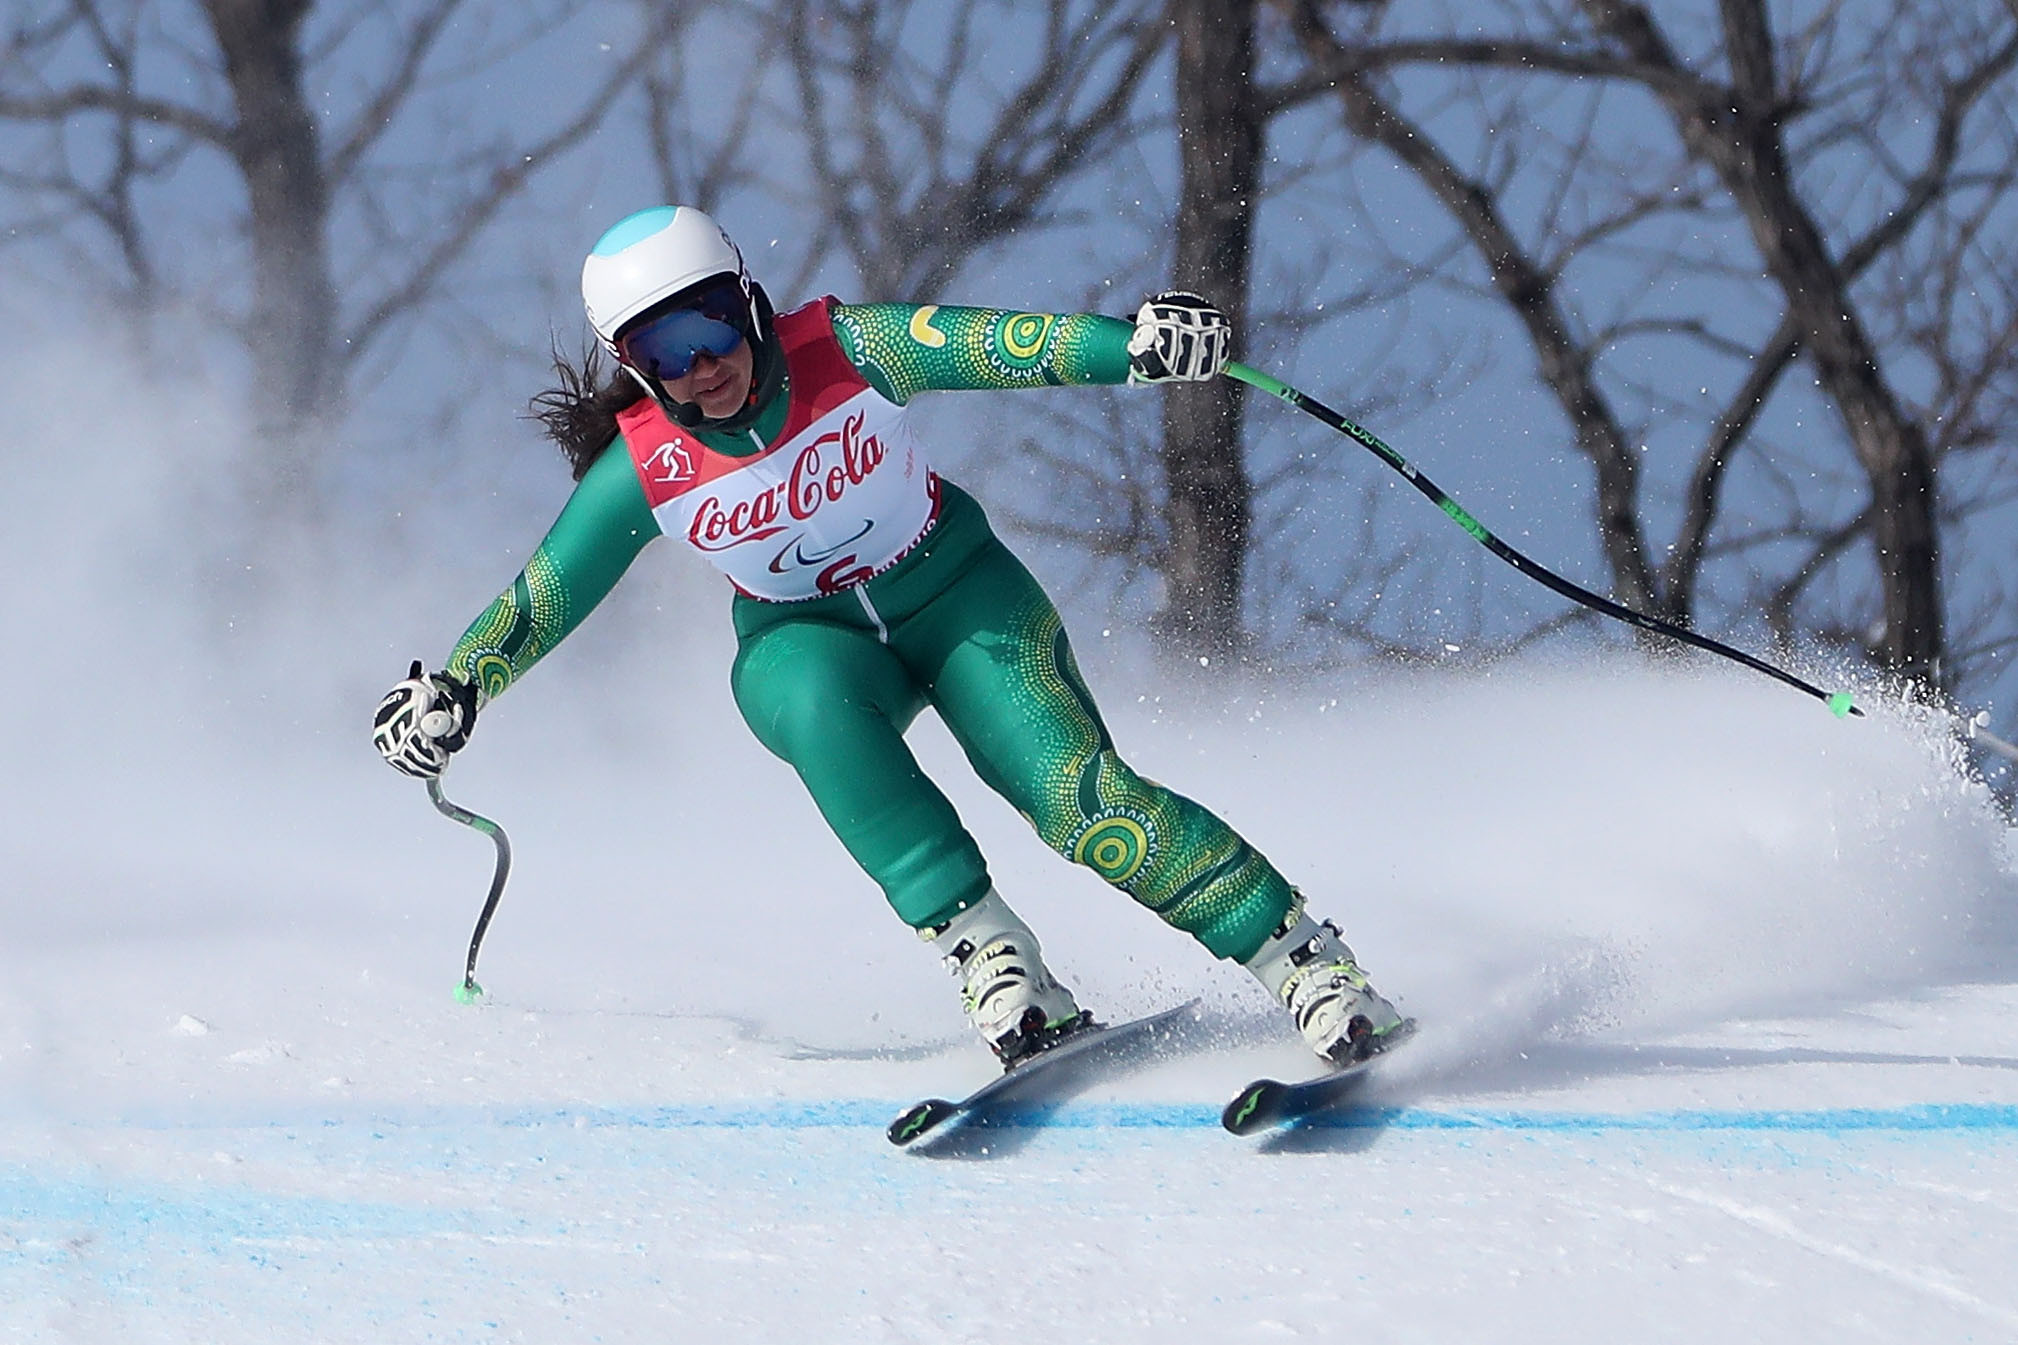 Melissa Perrine won two bronze medals for Australia at Pyeongchang 2018 ©Getty Images